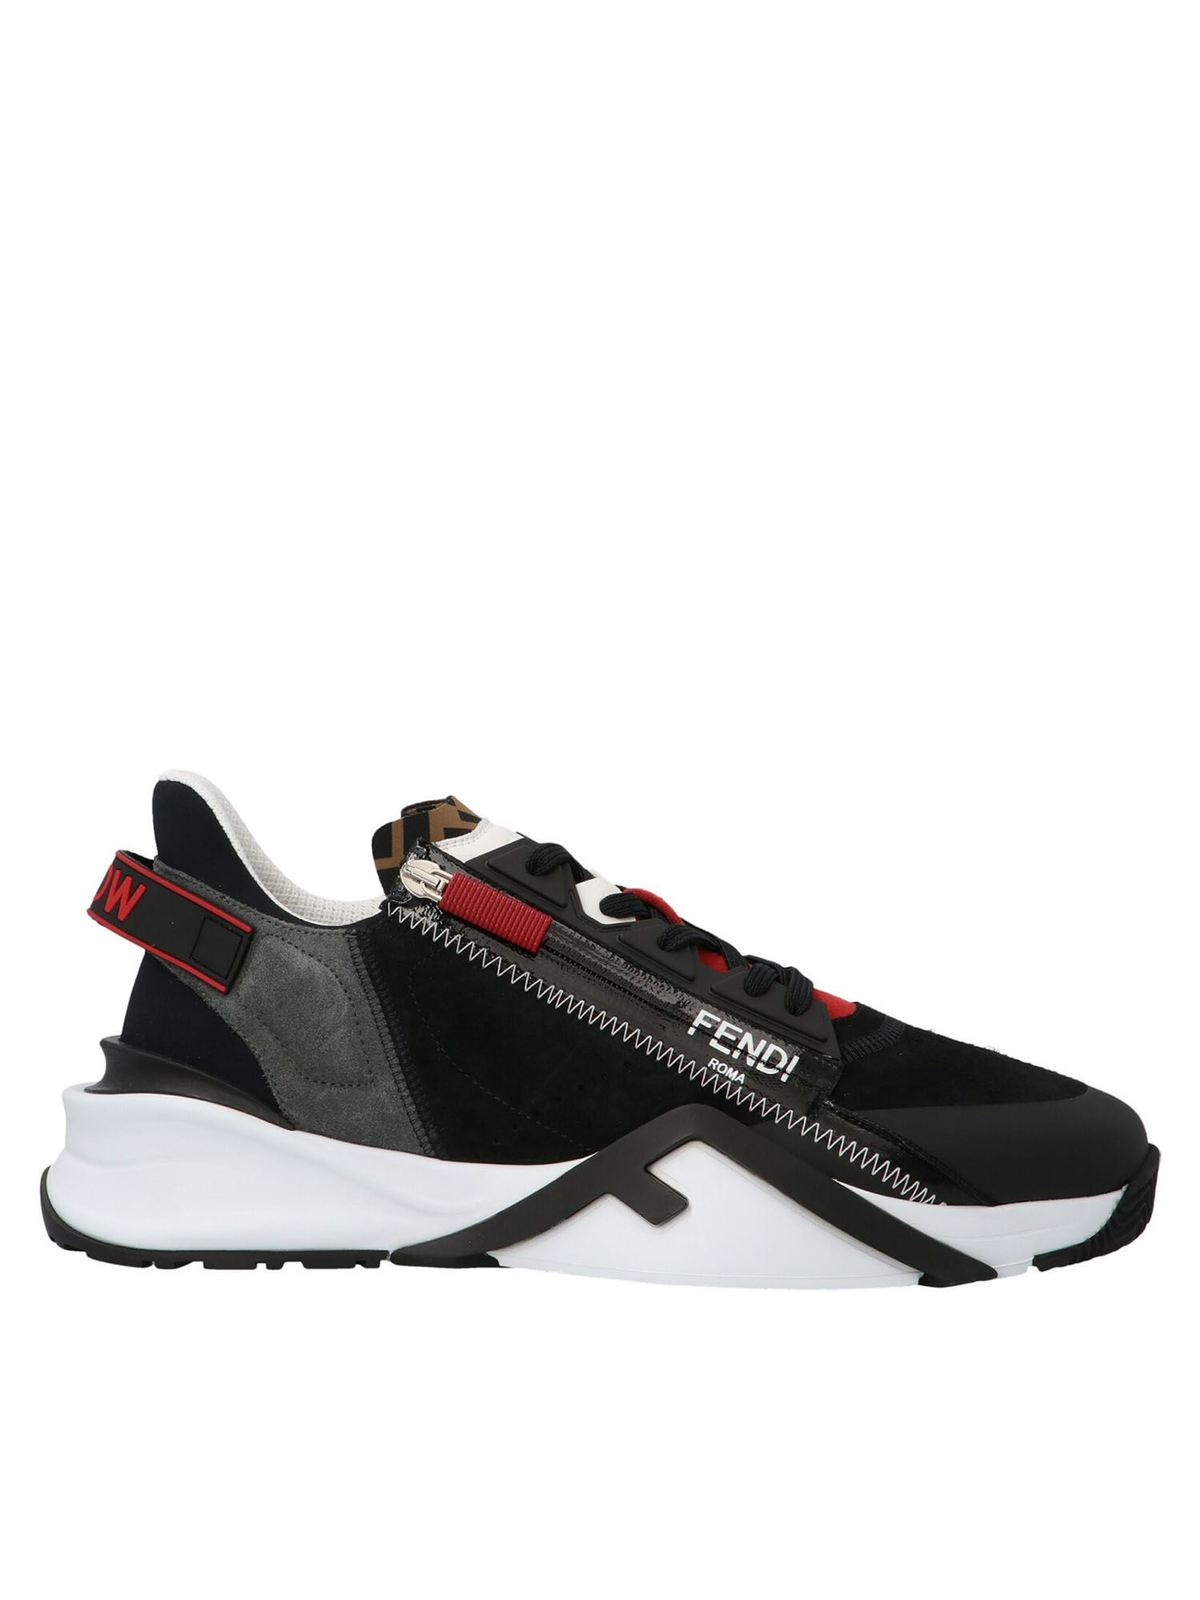 Fendi Suedes CHUNKY SNEAKERS IN BLACK AND RED